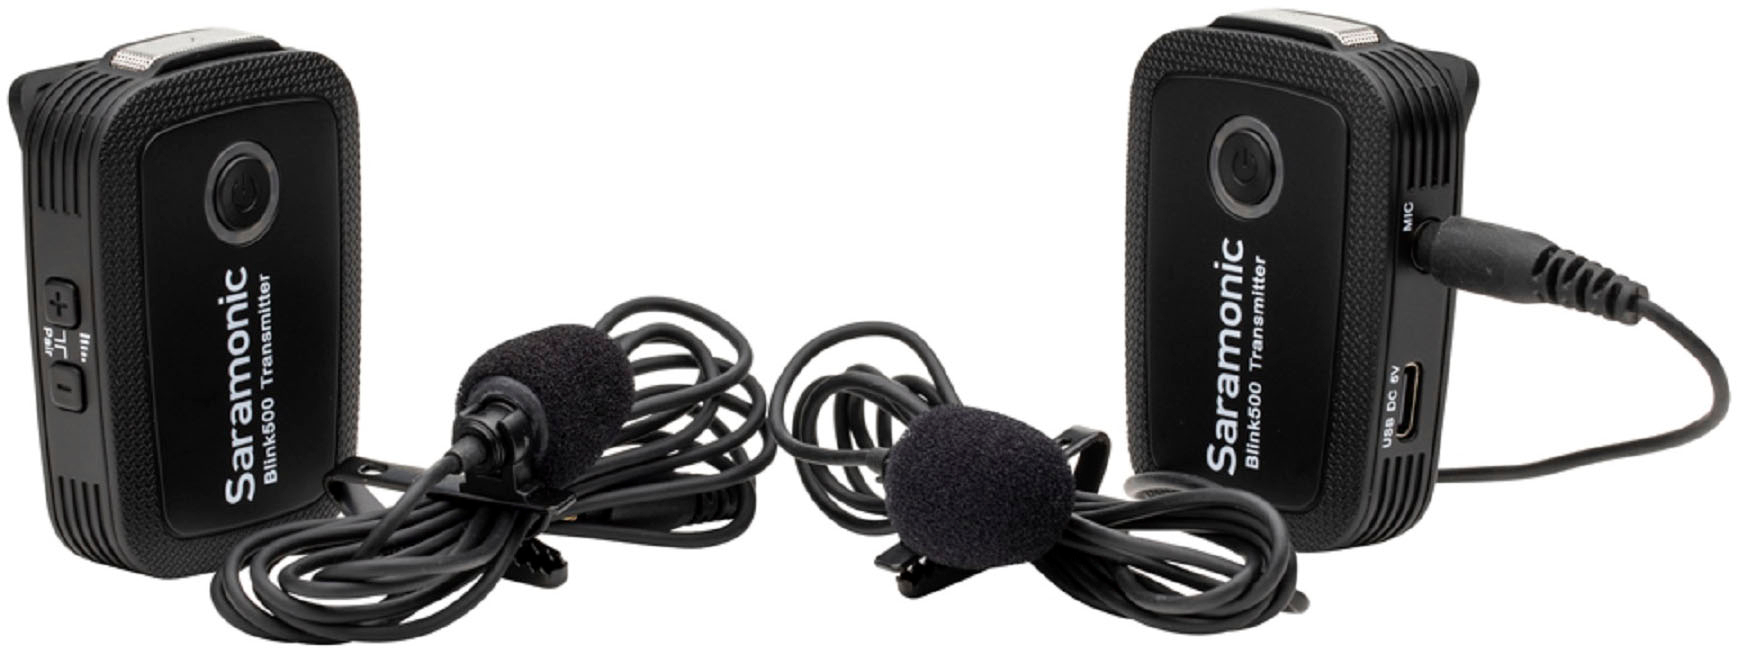 Saramonic Ultracompact 2.4 GHz 2-Person Wireless Clip-On Mic 